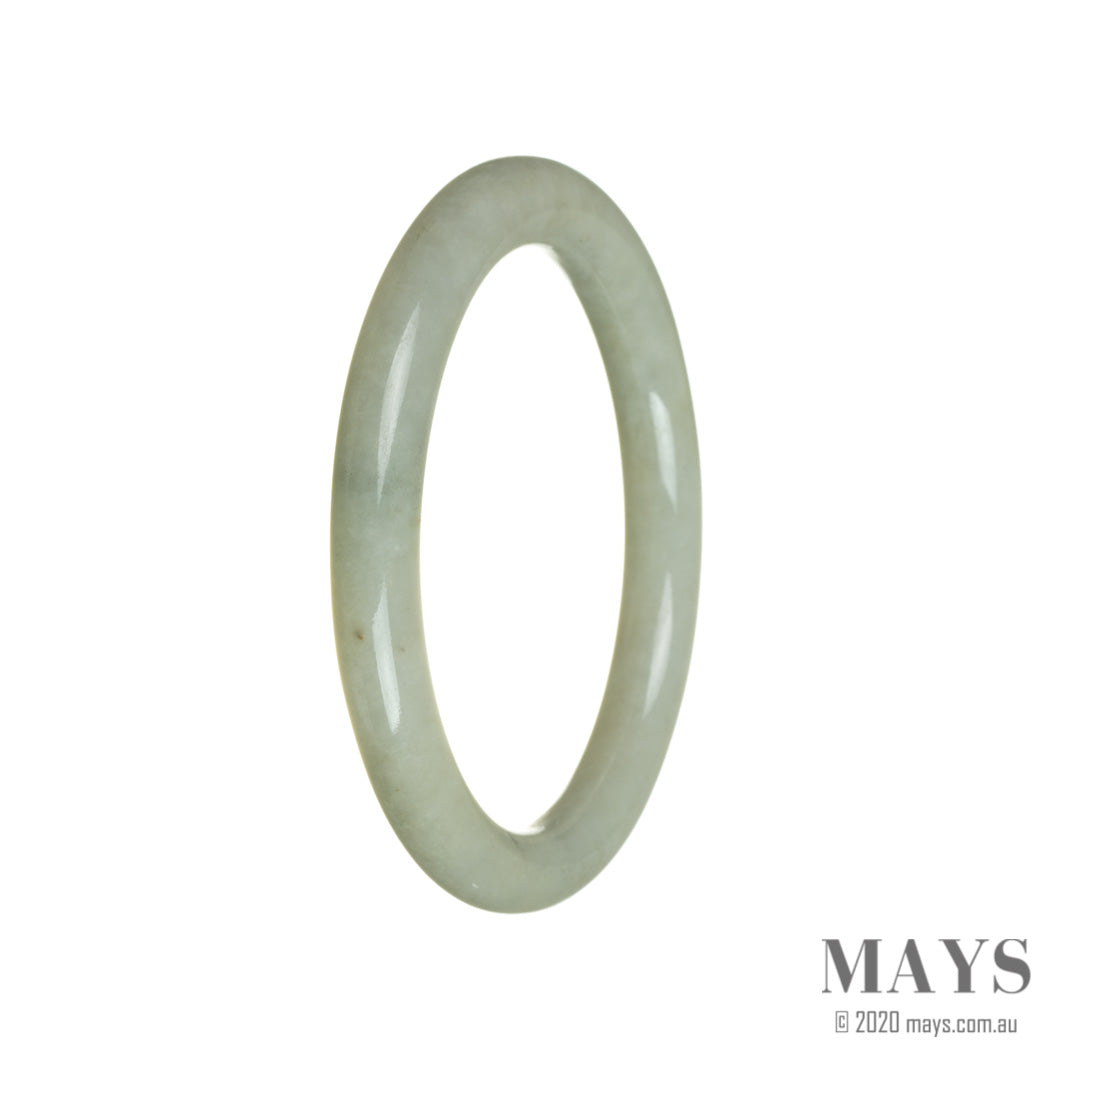 A light green Burmese jade bangle with an oval shape, measuring 60mm. Sold by MAYS GEMS.